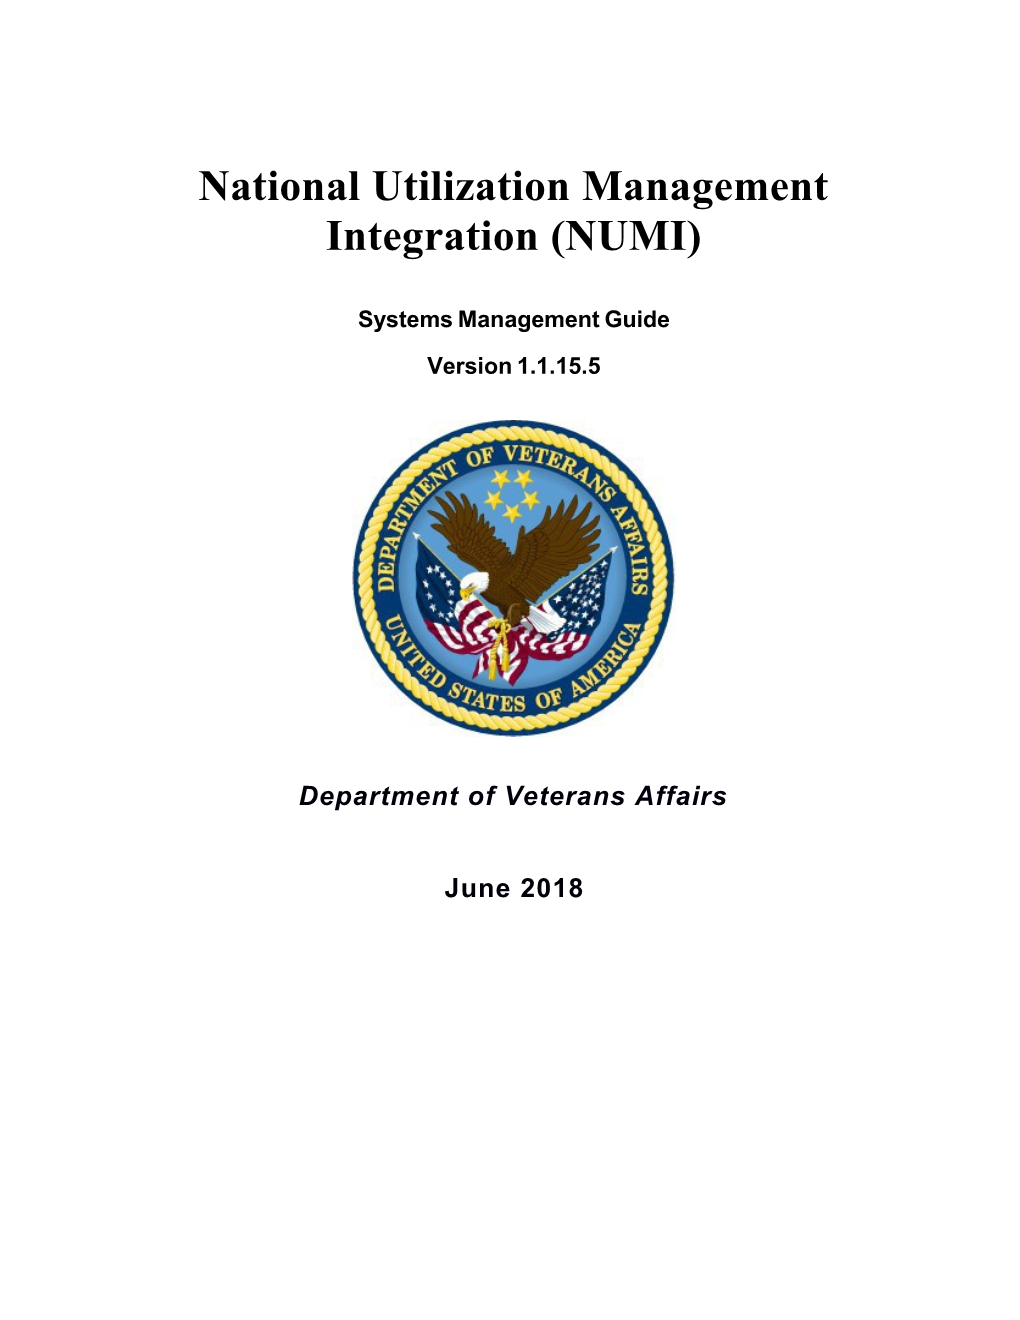 National Utilization Management Integration Systems Management Guide and Technical Manual